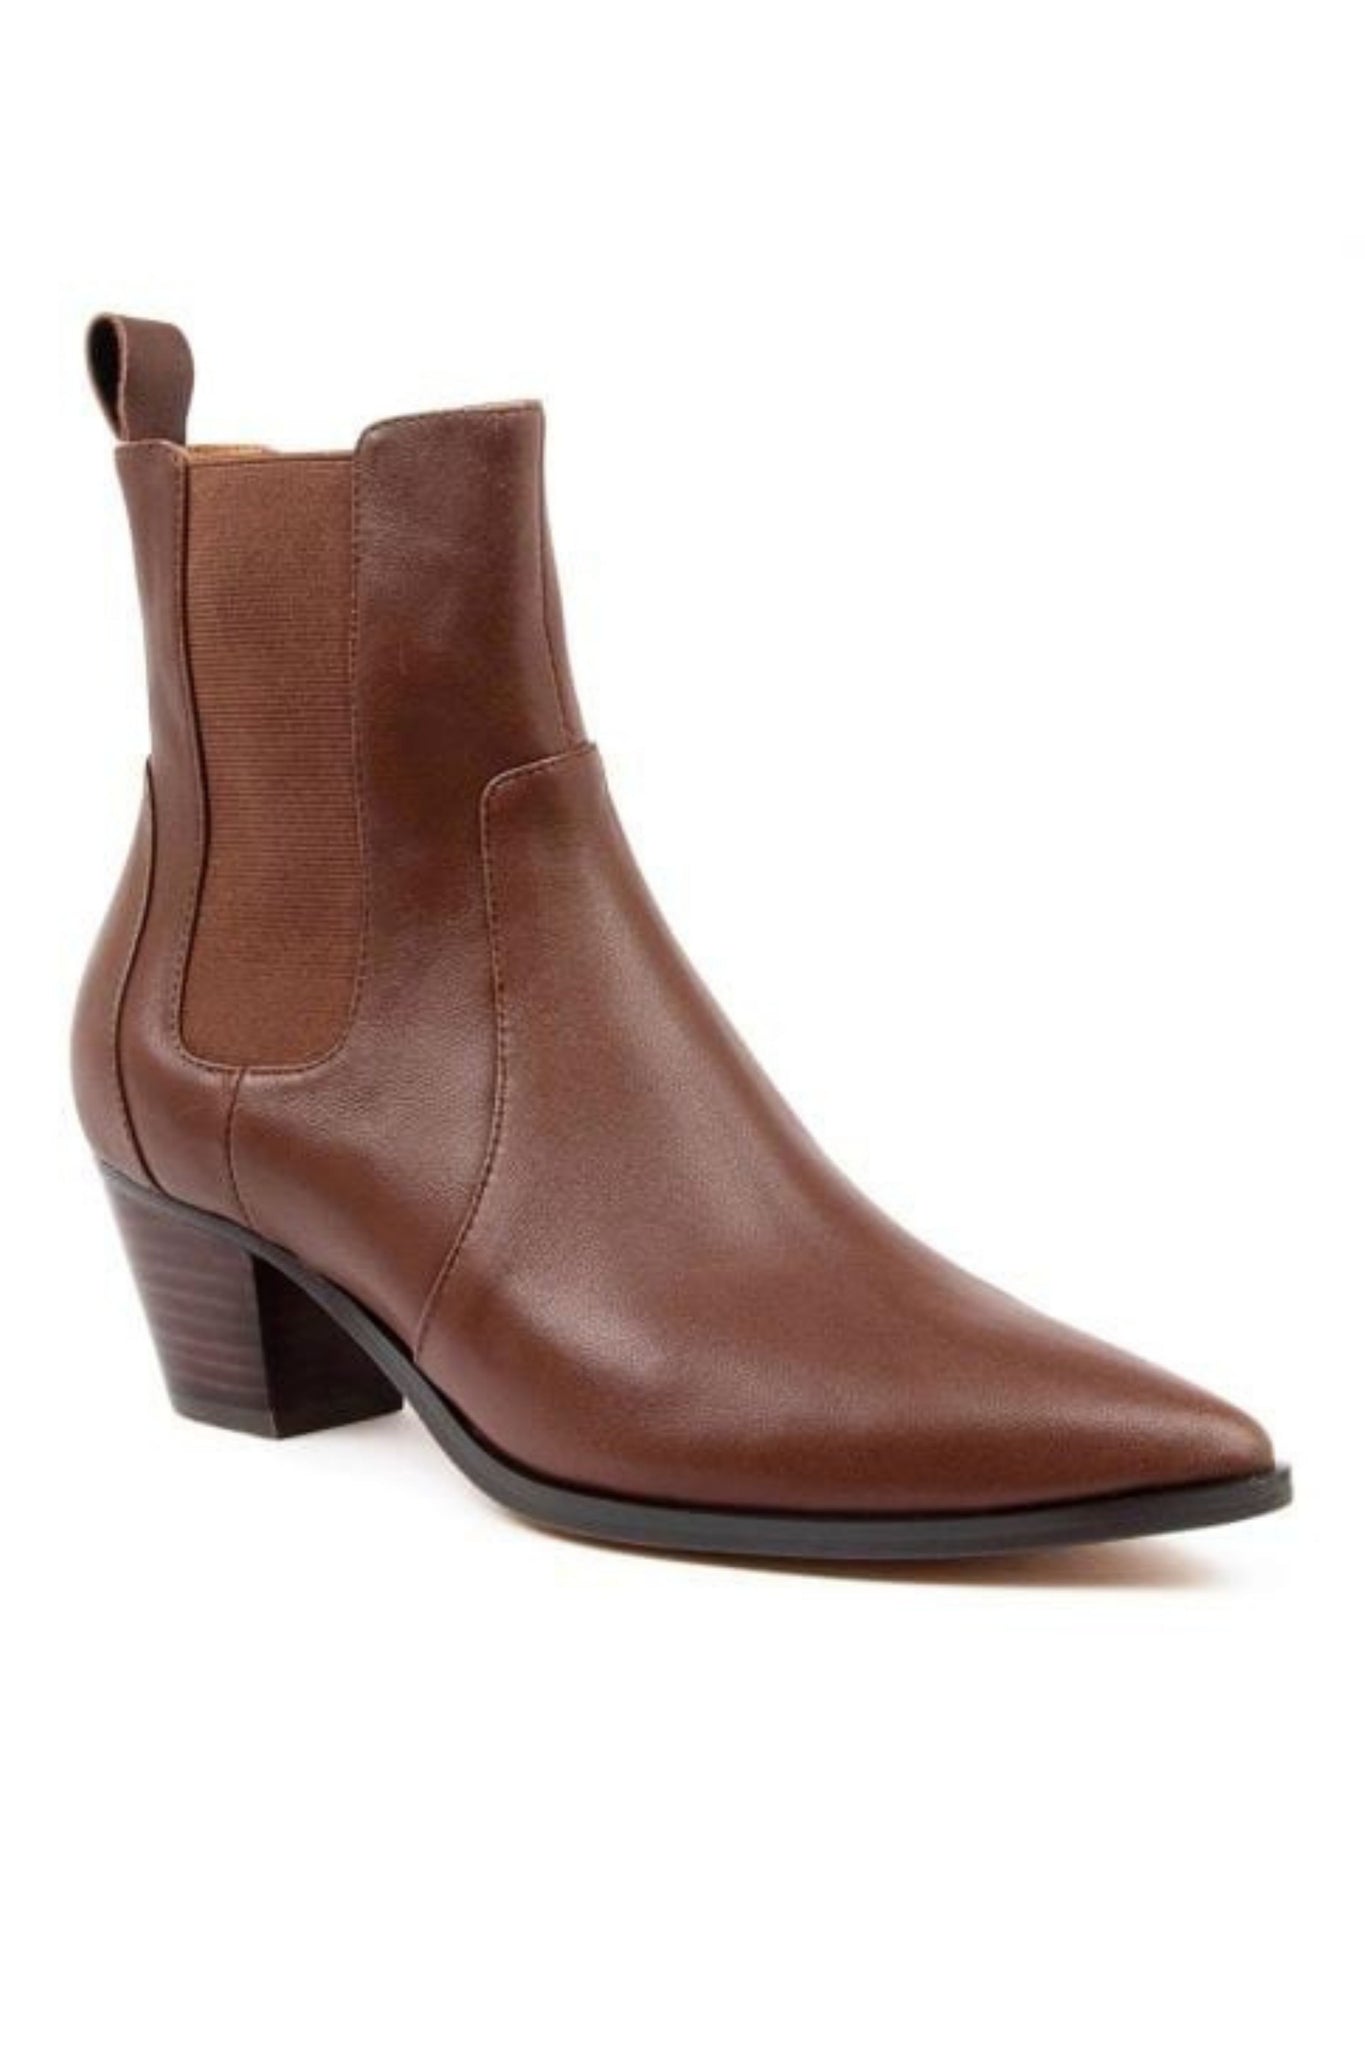 Gianni Ankle Boot - Choc Leather